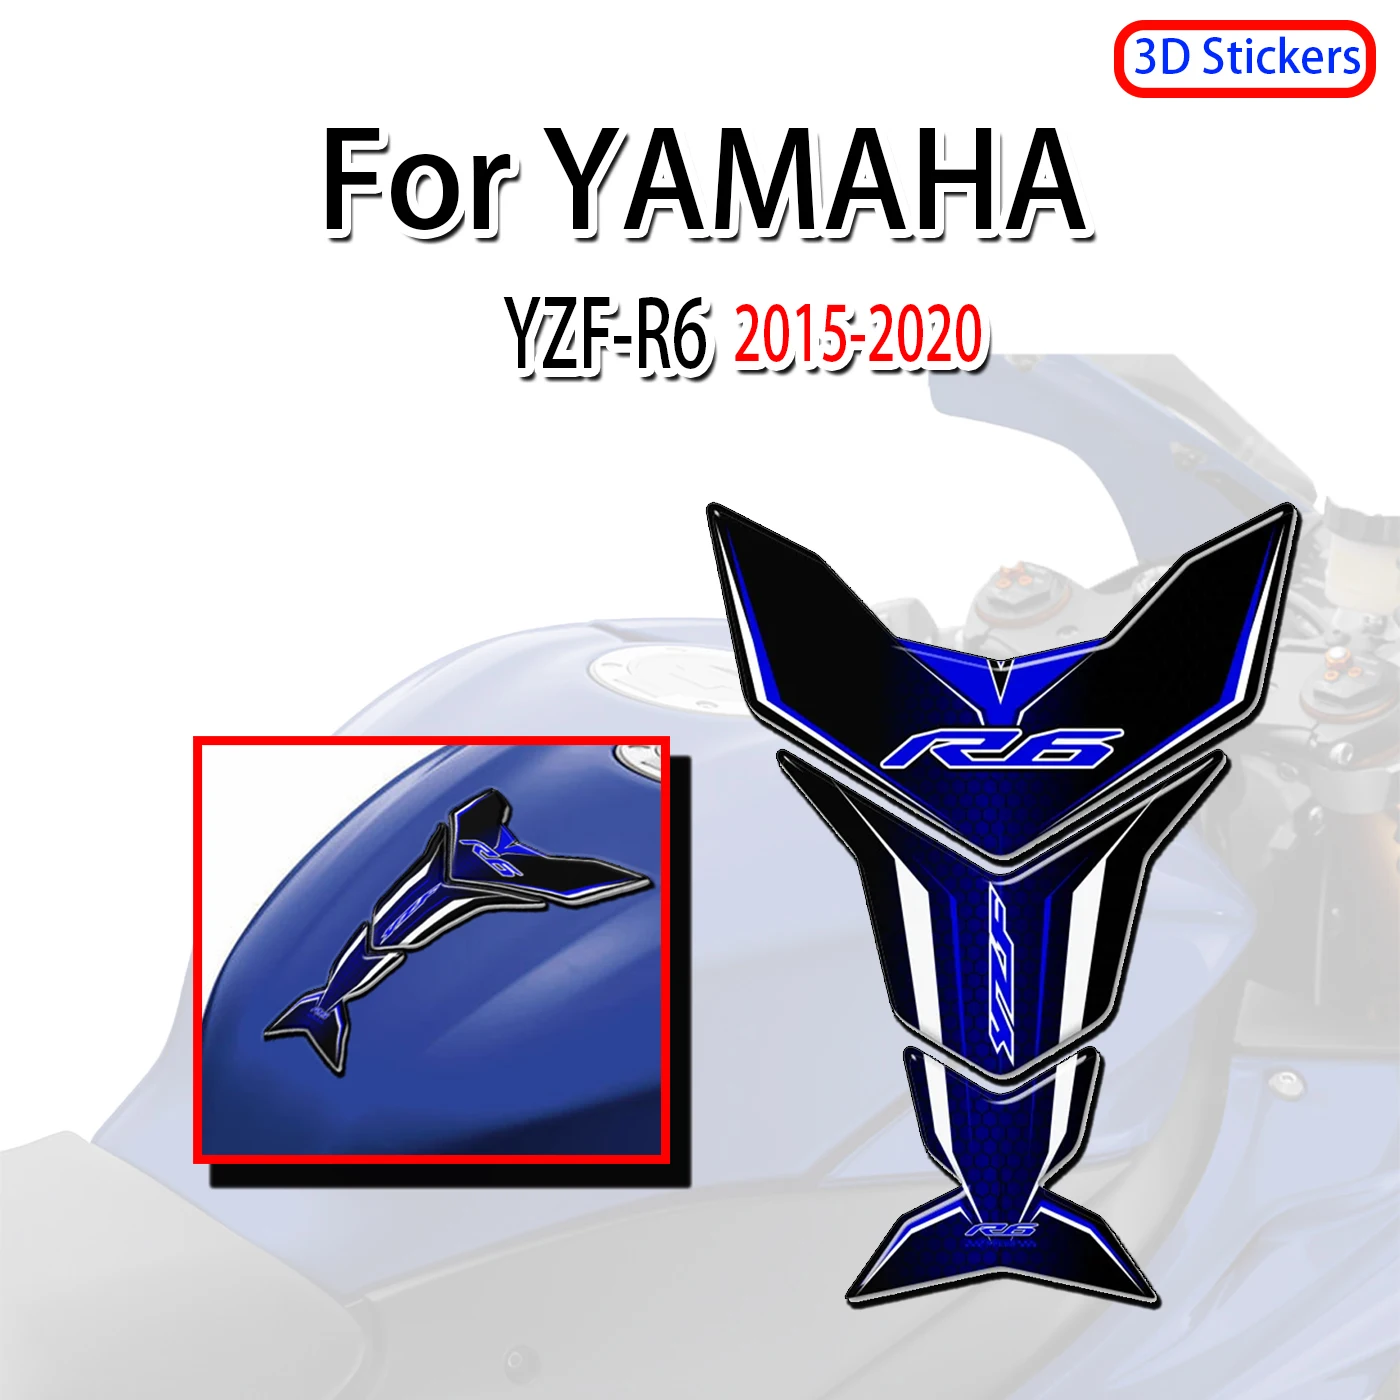 Motocycle Decal YZF R6 Tank Pad Stickers Decal Protector For YAMAHA YZF-R6 YZFR6 Fairing Emblem Badge Logo R6 Knee 2015-2020